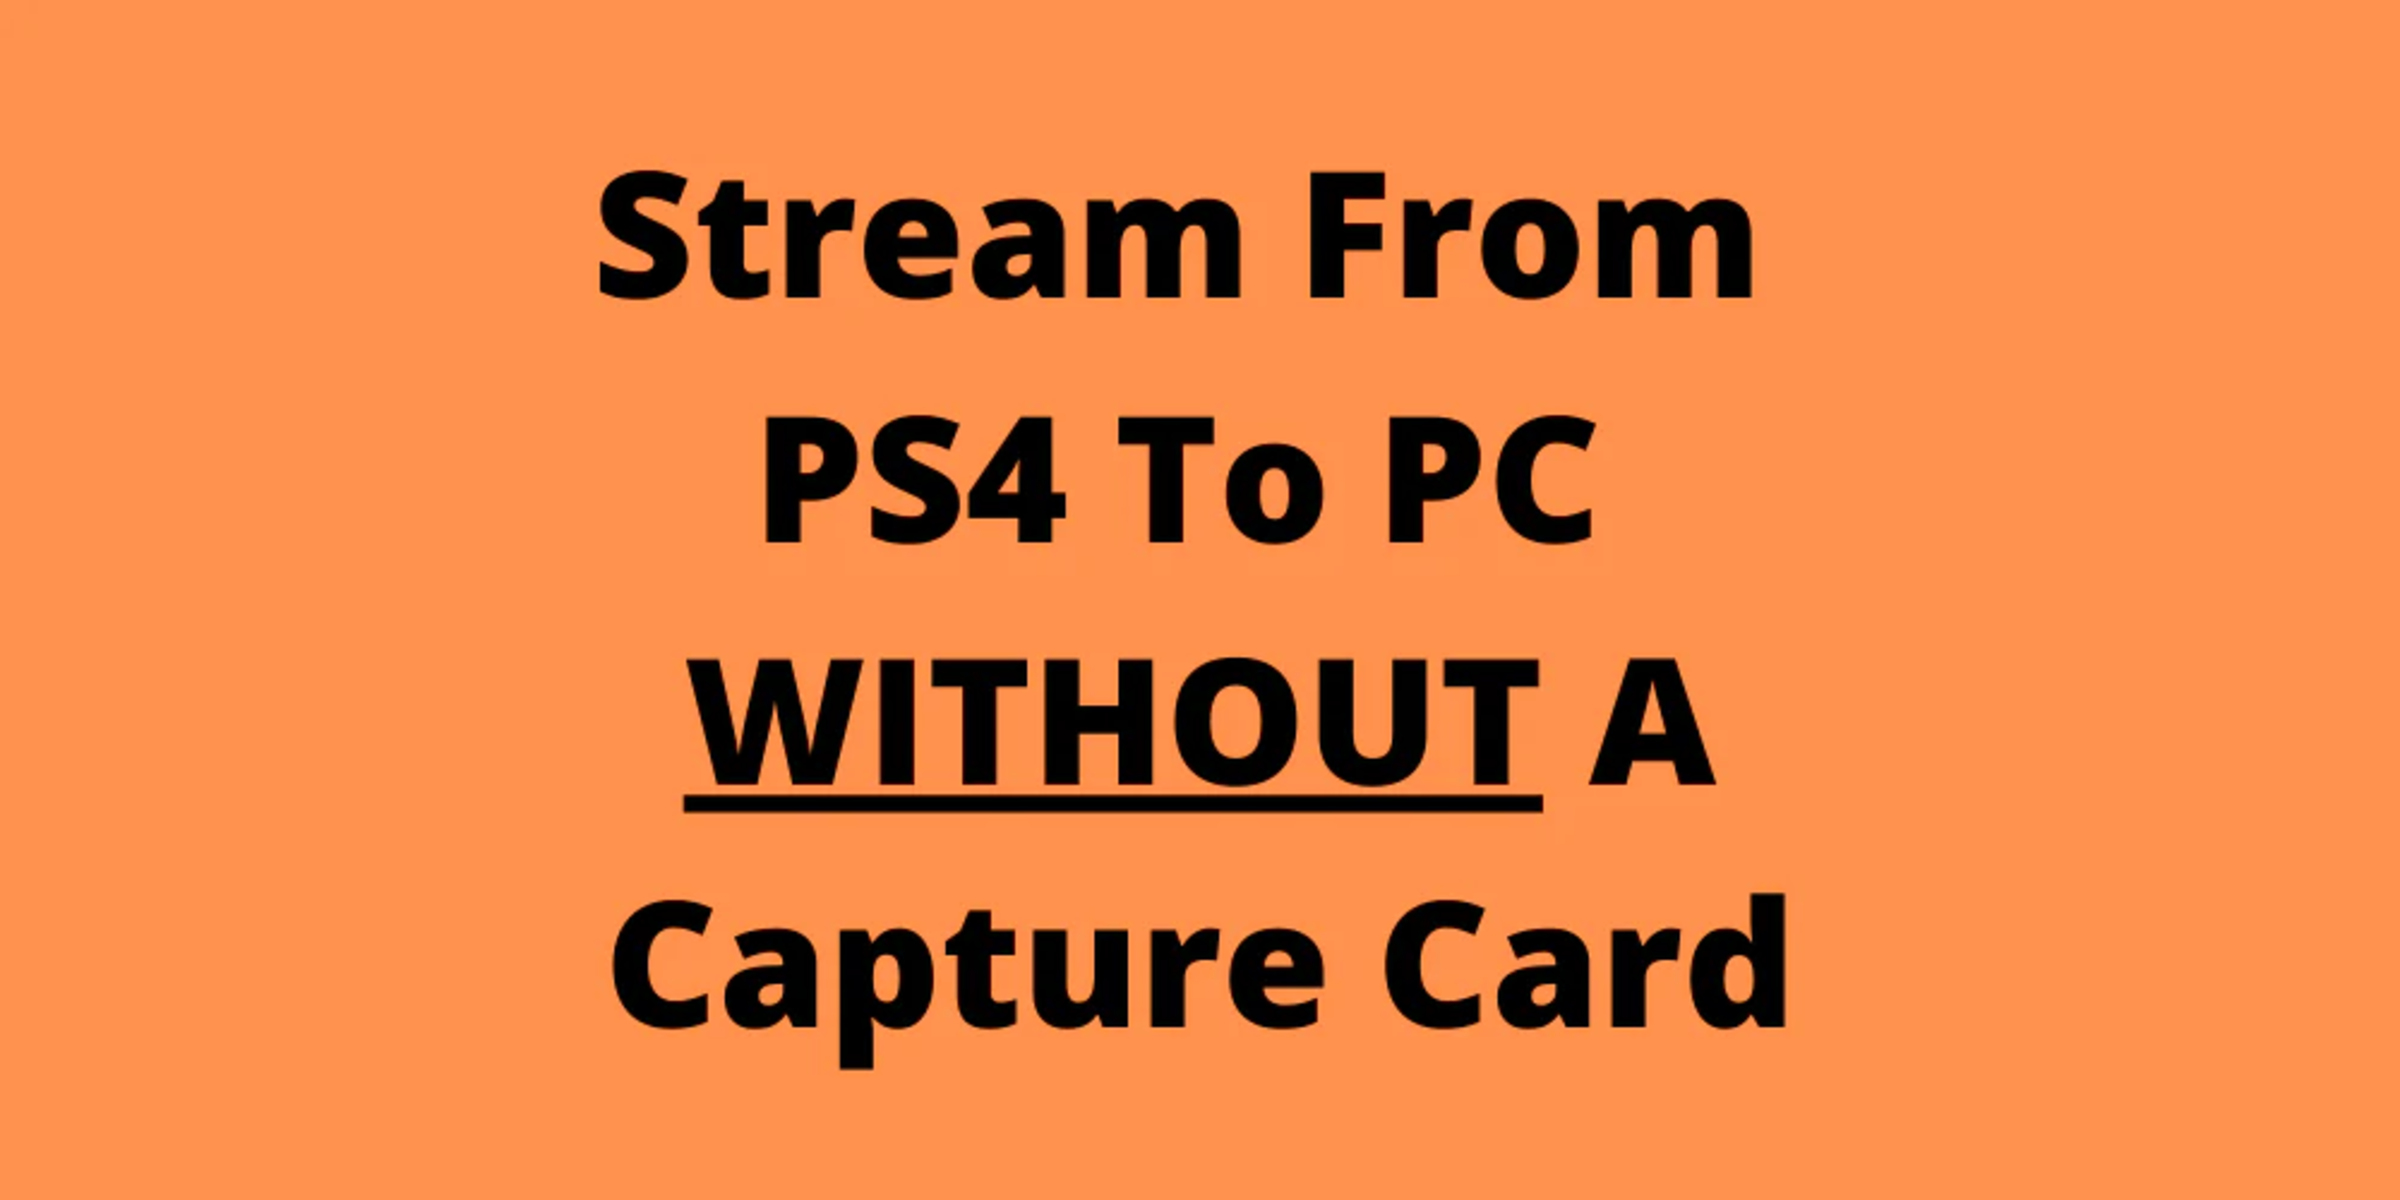 How To Stream PS4 To PC Without Capture Card